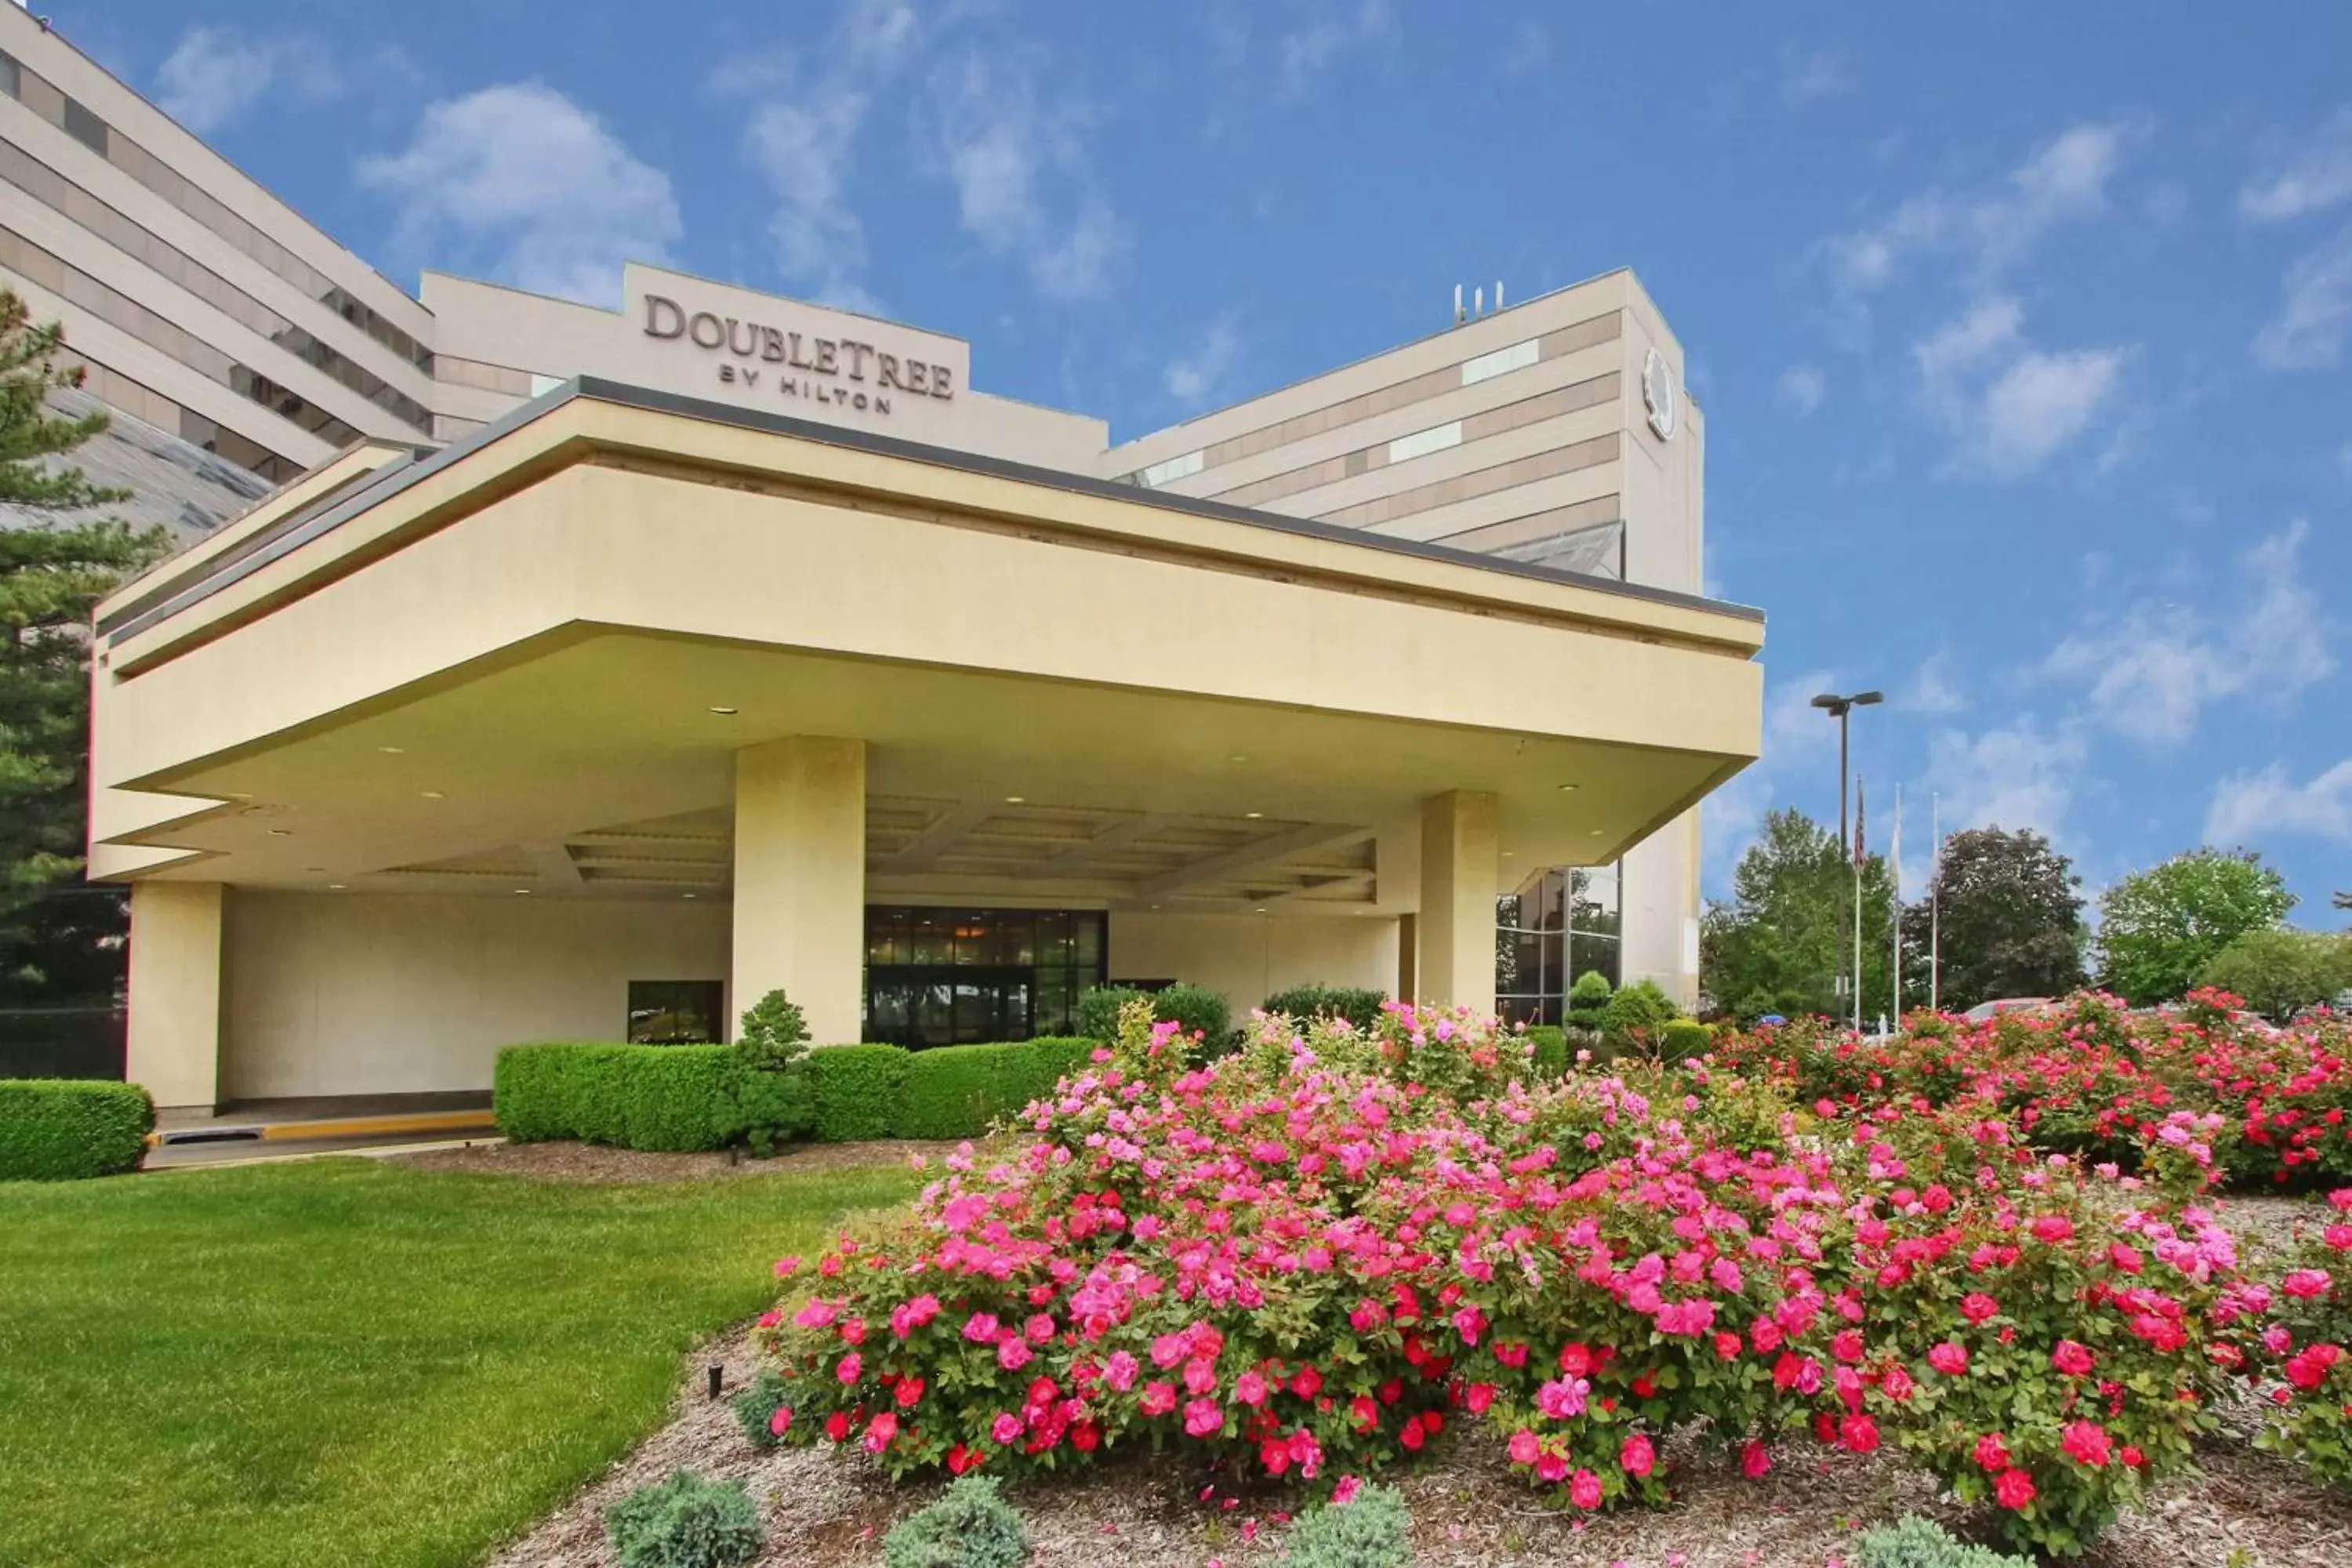 Property Building in DoubleTree by Hilton Hotel Newark Airport